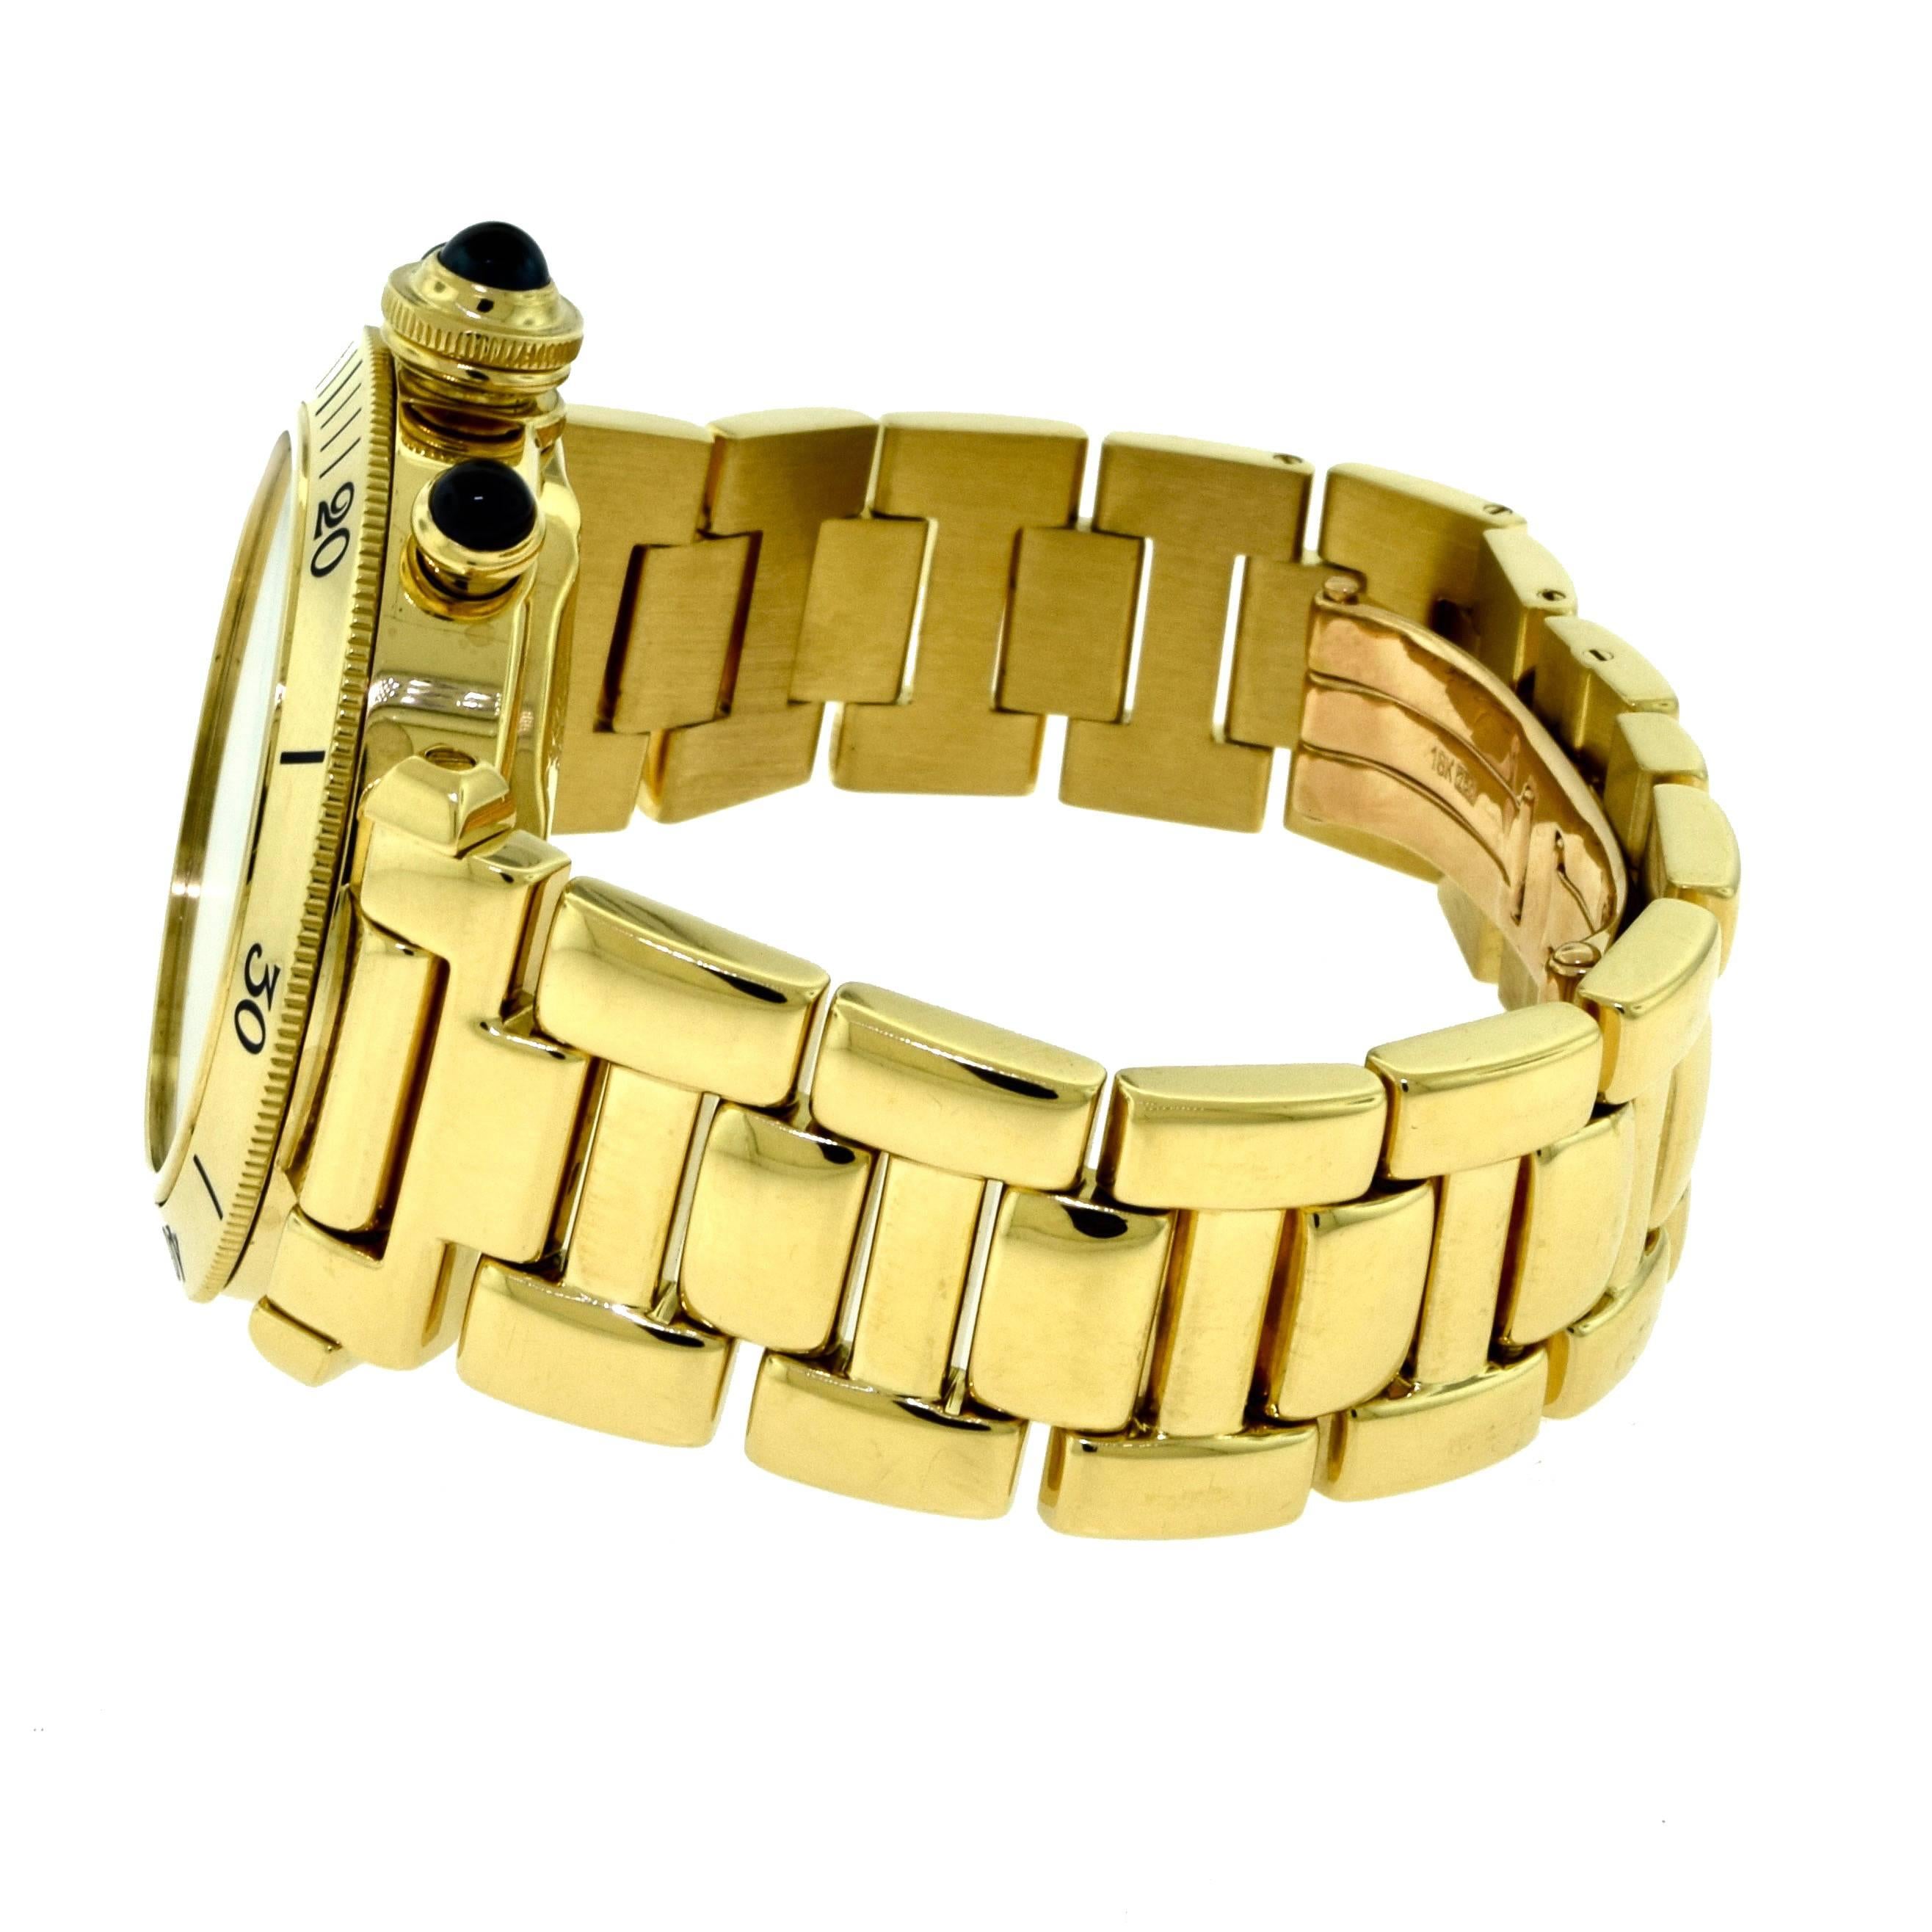 Brand: Cartier
Series: Pasha
Reference No.: 2111
Movement: Automatic
Caliber: 205
Case Material: 18k Yellow Gold
Case Diameter: 38 mm
Material Bezel: 18k Yellow Gold
Glass: Sapphire Glass
Dial: Silvered Guilloche
Bracelet Material: 18k Yellow Gold 